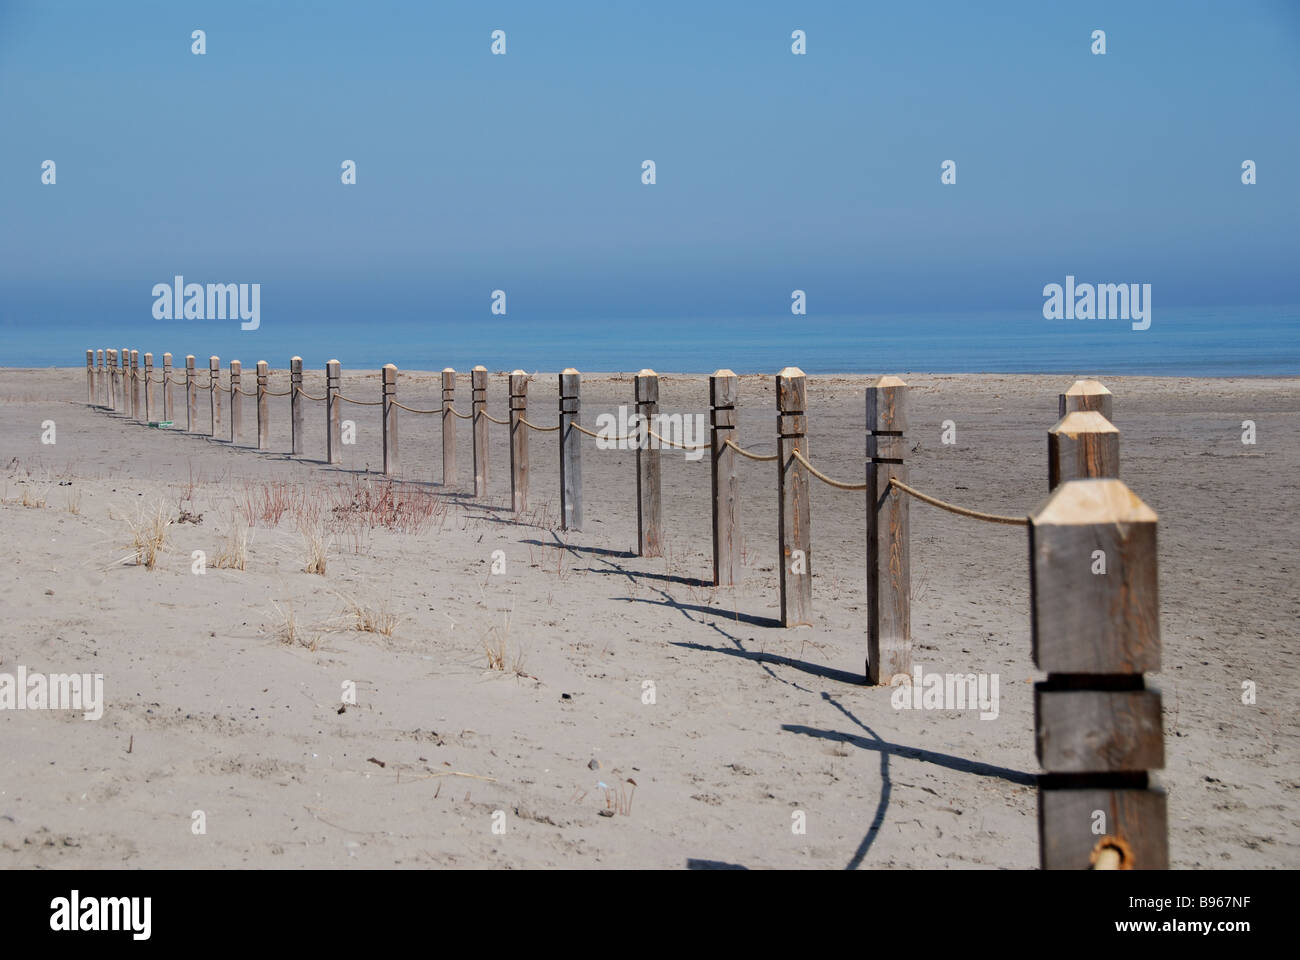 An early season line of posts installed on a Toronto beach to separate sensitive grasslands from the public recreational area.. Stock Photo